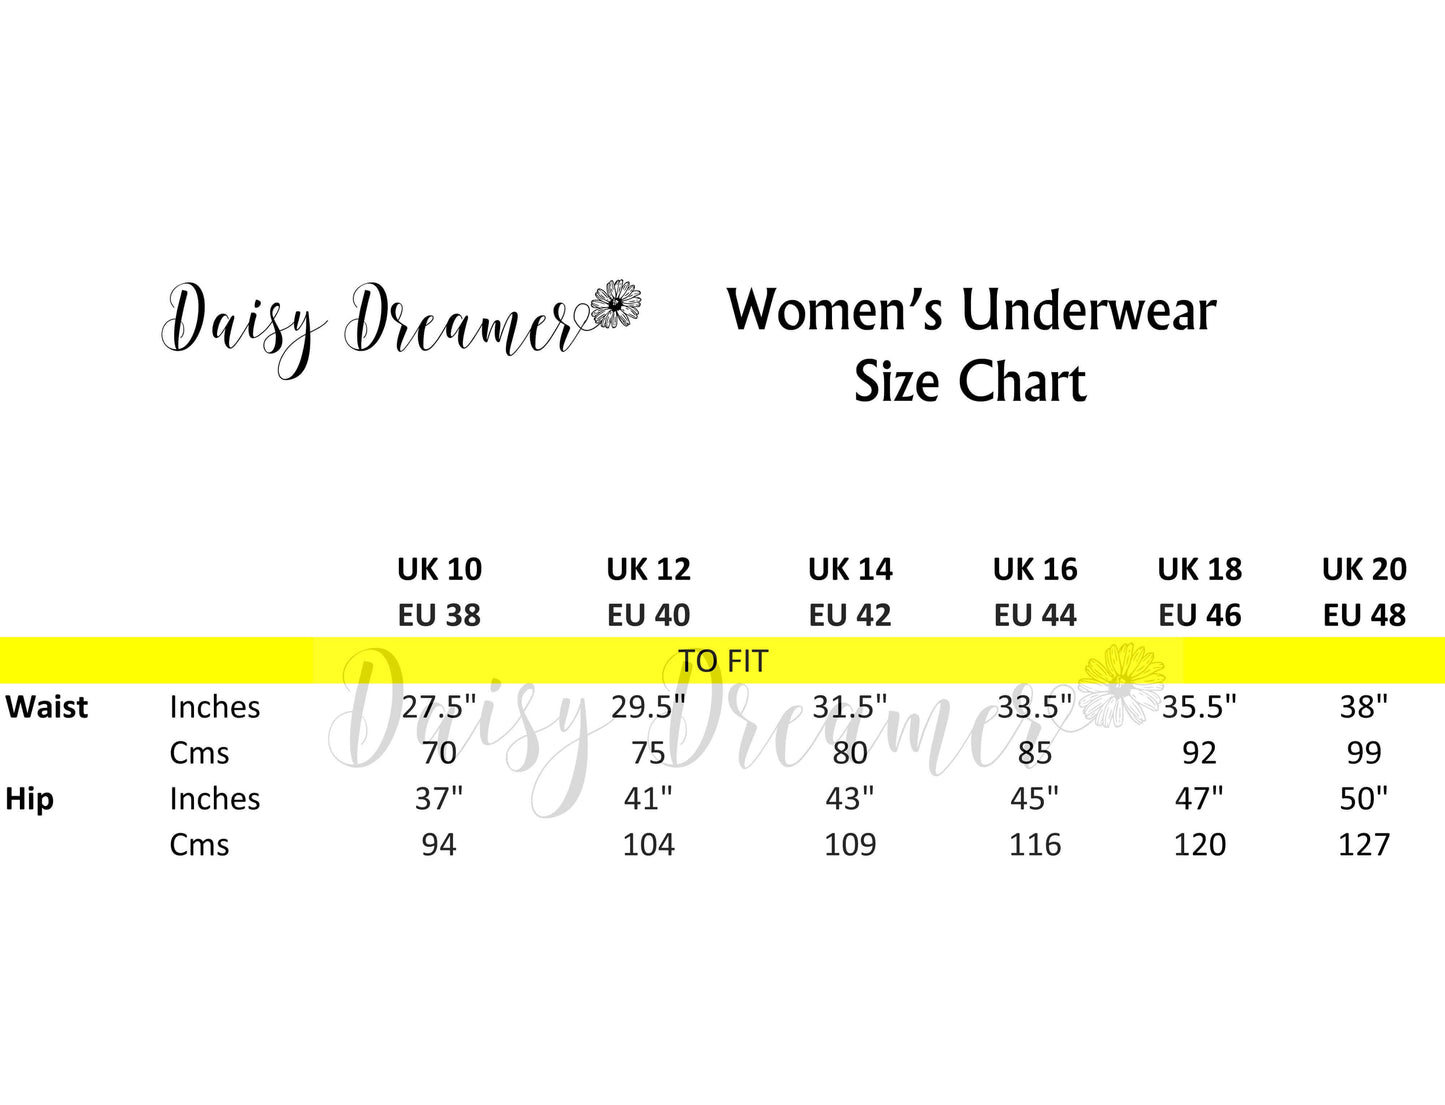 Pack of 10 Women's High Leg Briefs Cotton Panties Knicker Everyday Comfort Fit Underwear. Buy now for £14.00. A Underwear by Daisy Dreamer. 10, 12, 14, 16, assorted, Bikini, black, blush pink, breathable, briefs, comfortable, cotton, daisy dreamer, hot pi